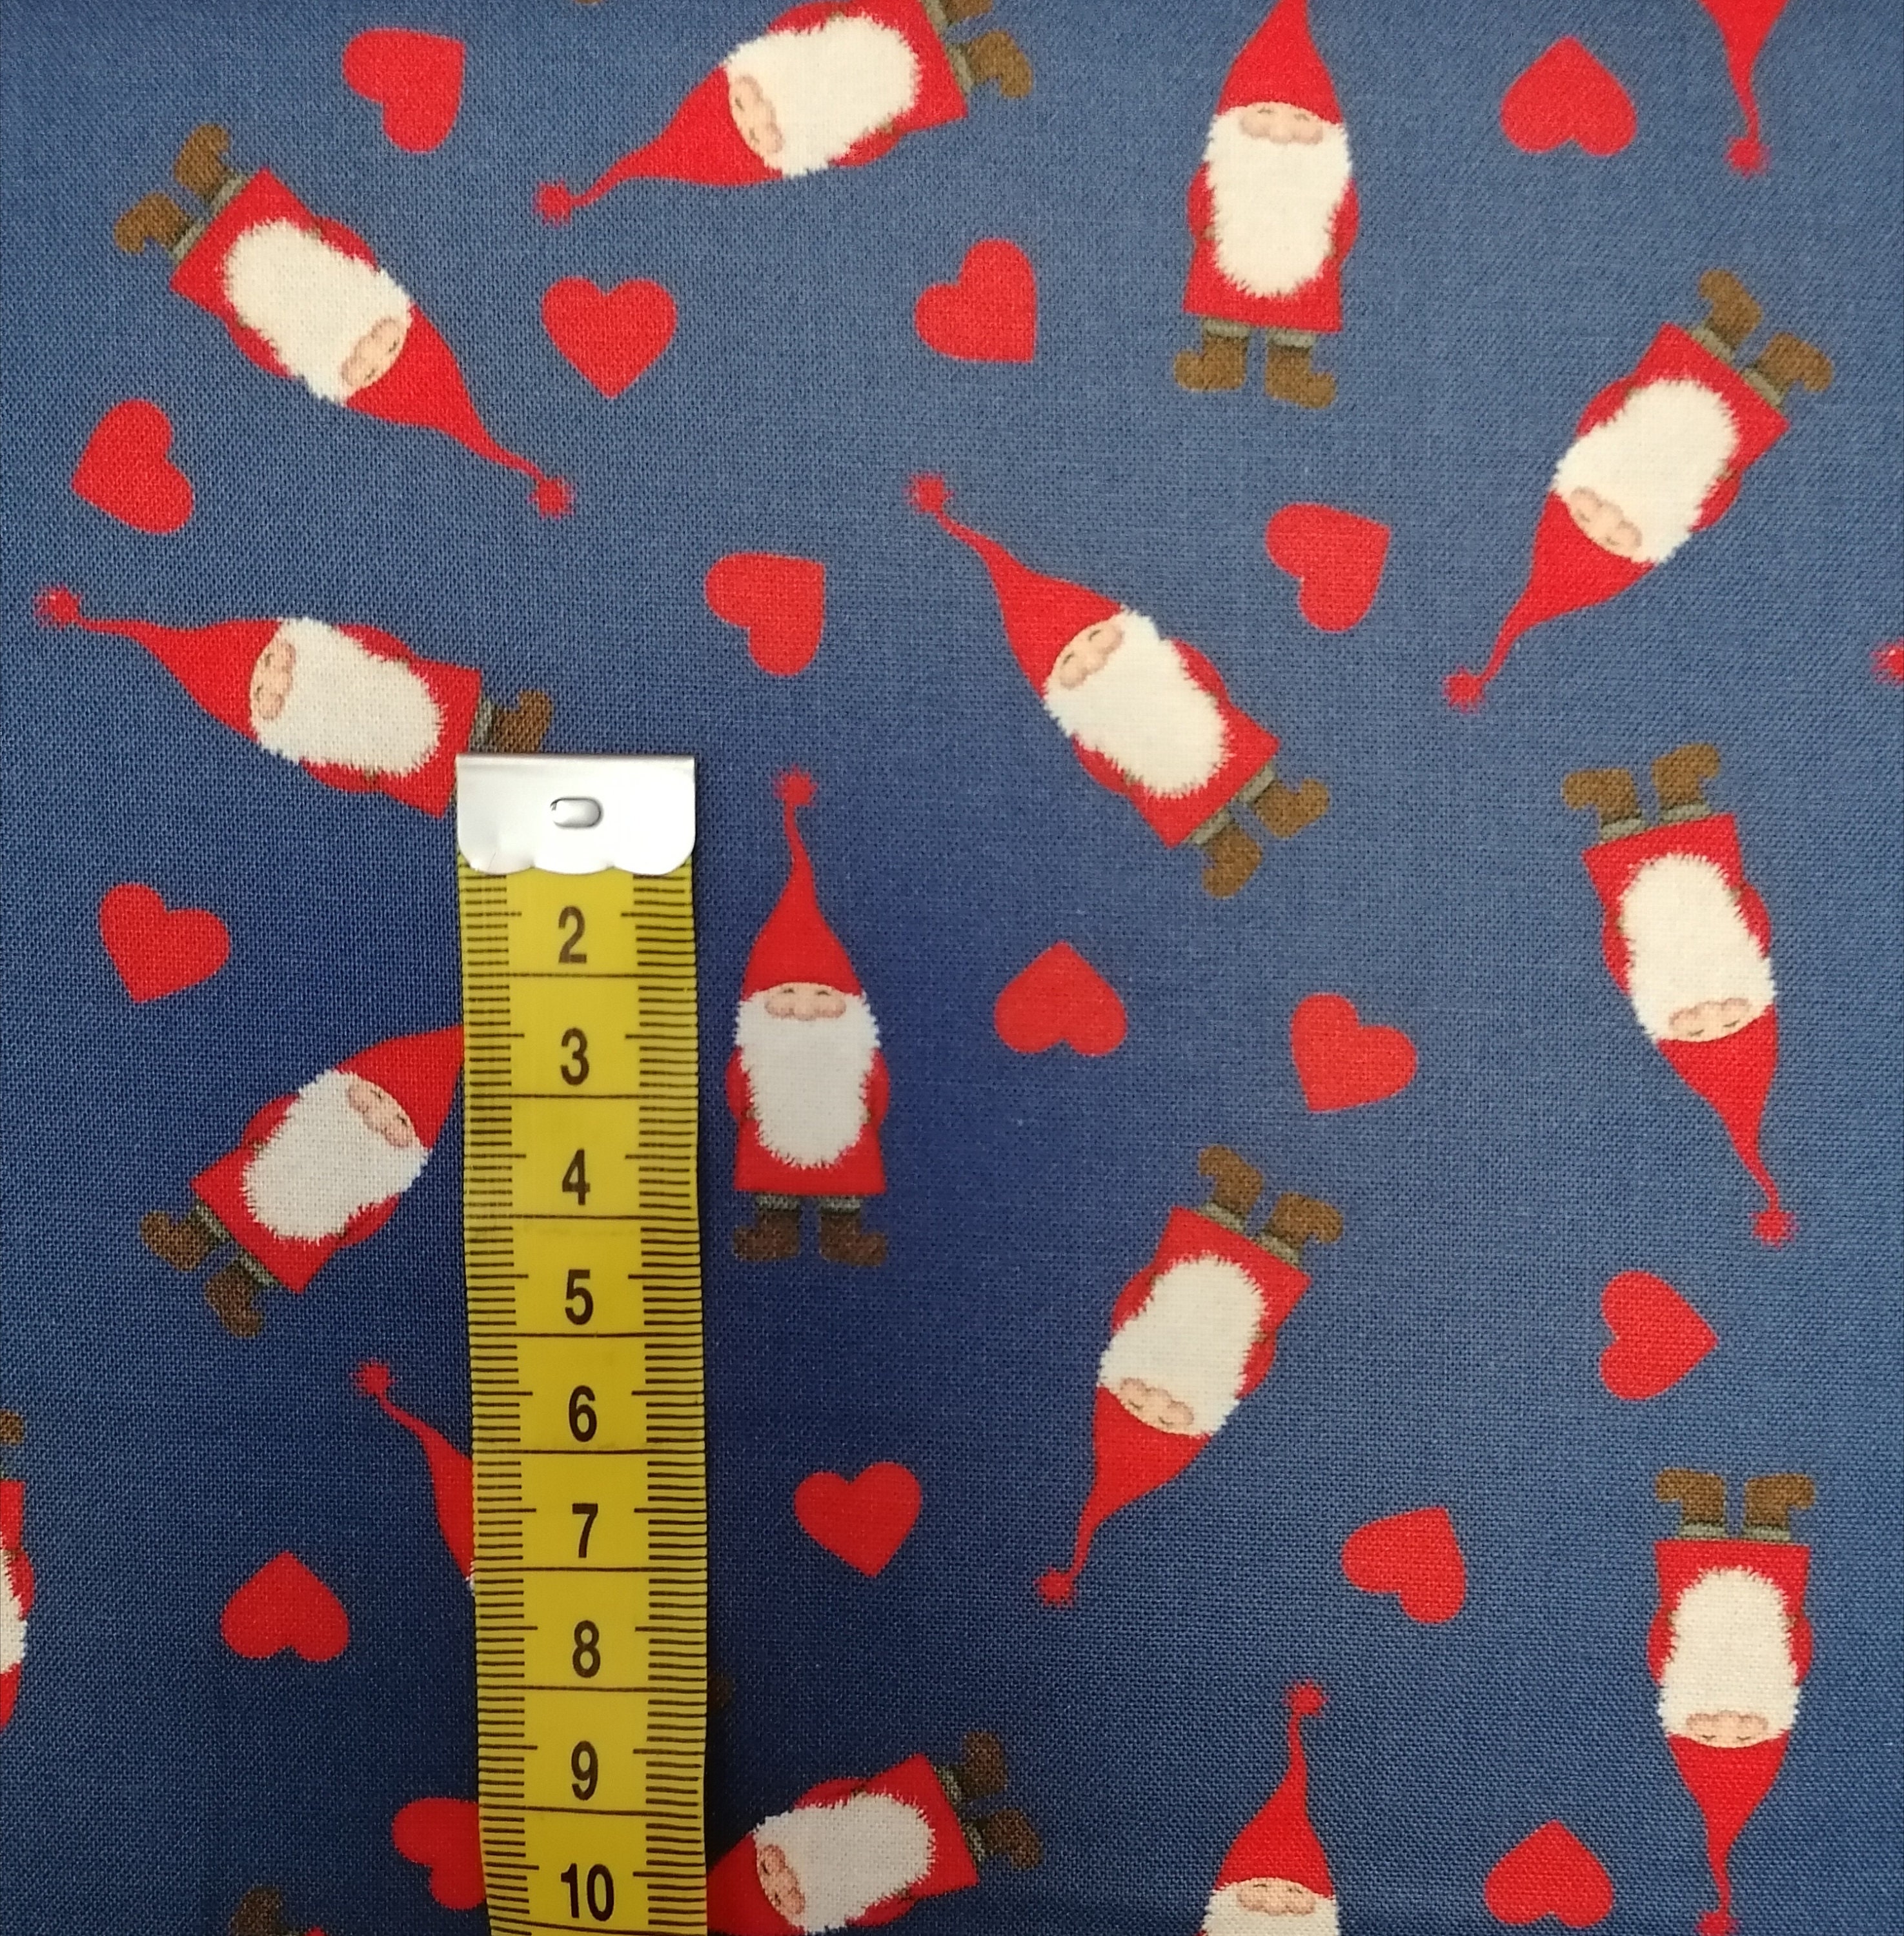 Christmas Gnome Cotton Fabric by the Yard, Gnome Fabric, Christmas Fabric,  Gnomes Fabric, Winter Fabric, Christmas Ornament, Christmas 